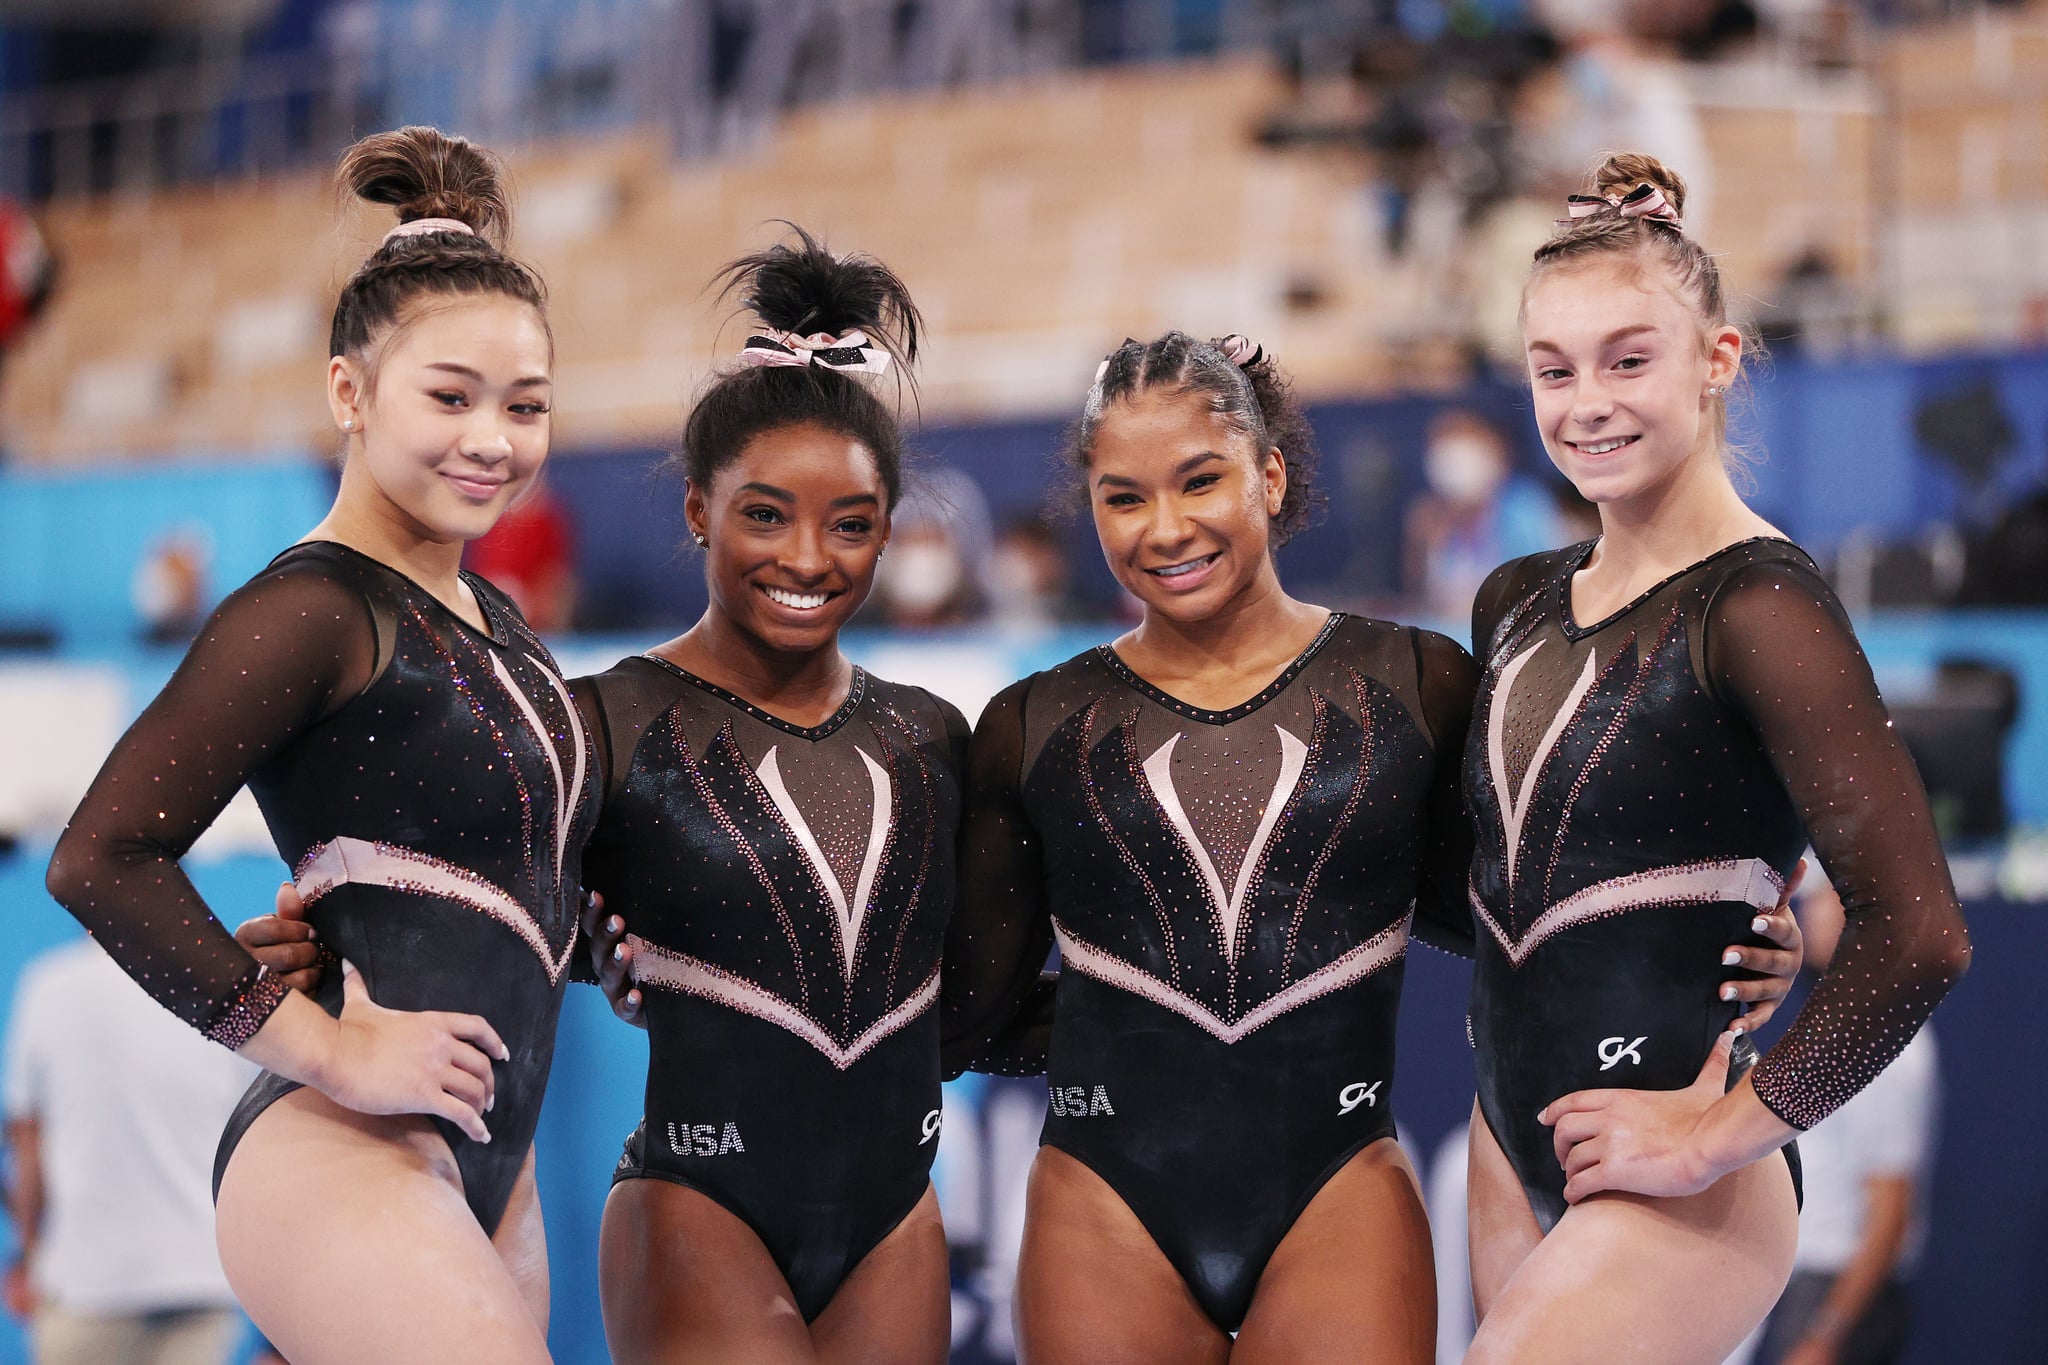 TOKYO, JAPAN - JULY 22: Sunisa Lee, Simone Biles, Jordan Chiles and Grace McCallum of Team United States pose for a photo during Women's Podium Training ahead of the Tokyo 2020 Olympic Games at Ariake Gymnastics Centre on July 22, 2021 in Tokyo, Japan. (Photo by Patrick Smith/Getty Images)